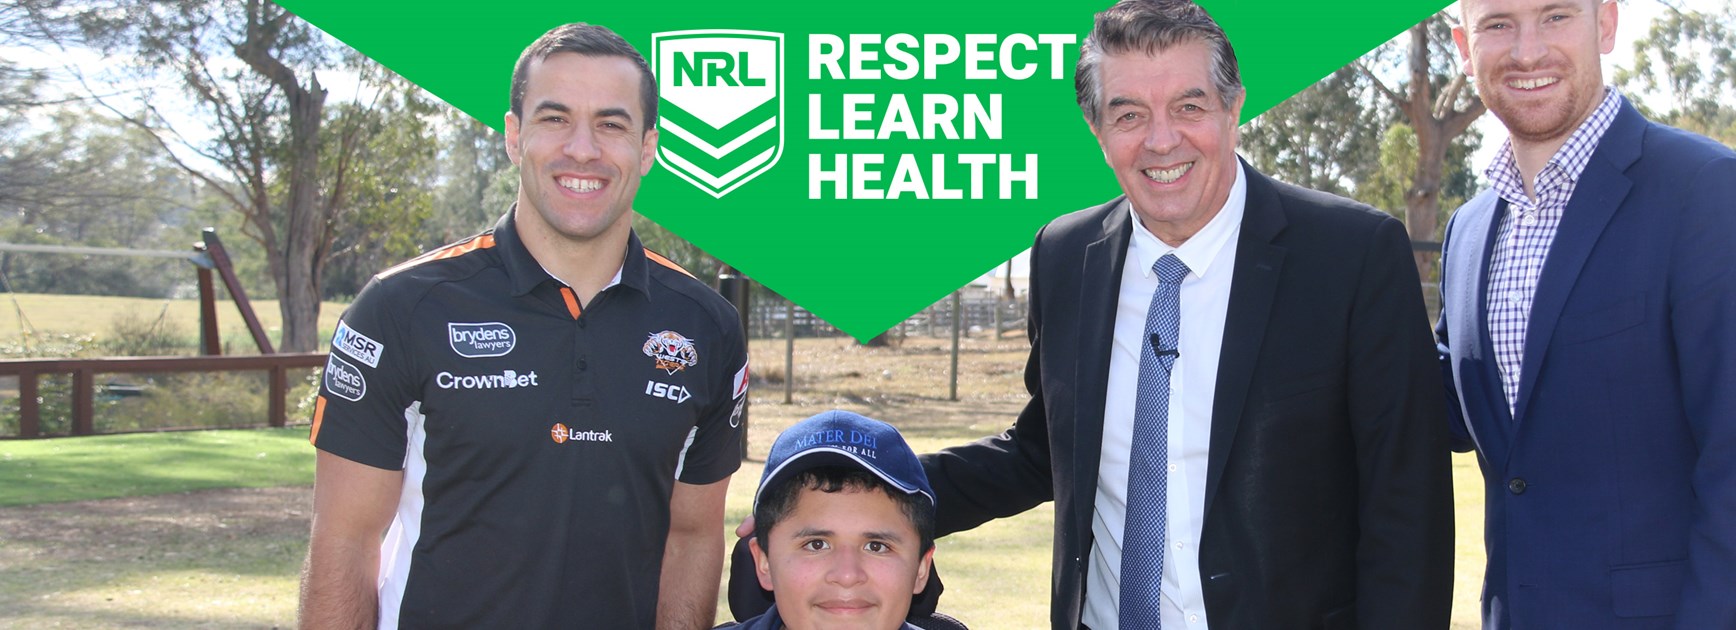 Wests Tigers break down barriers to win community award